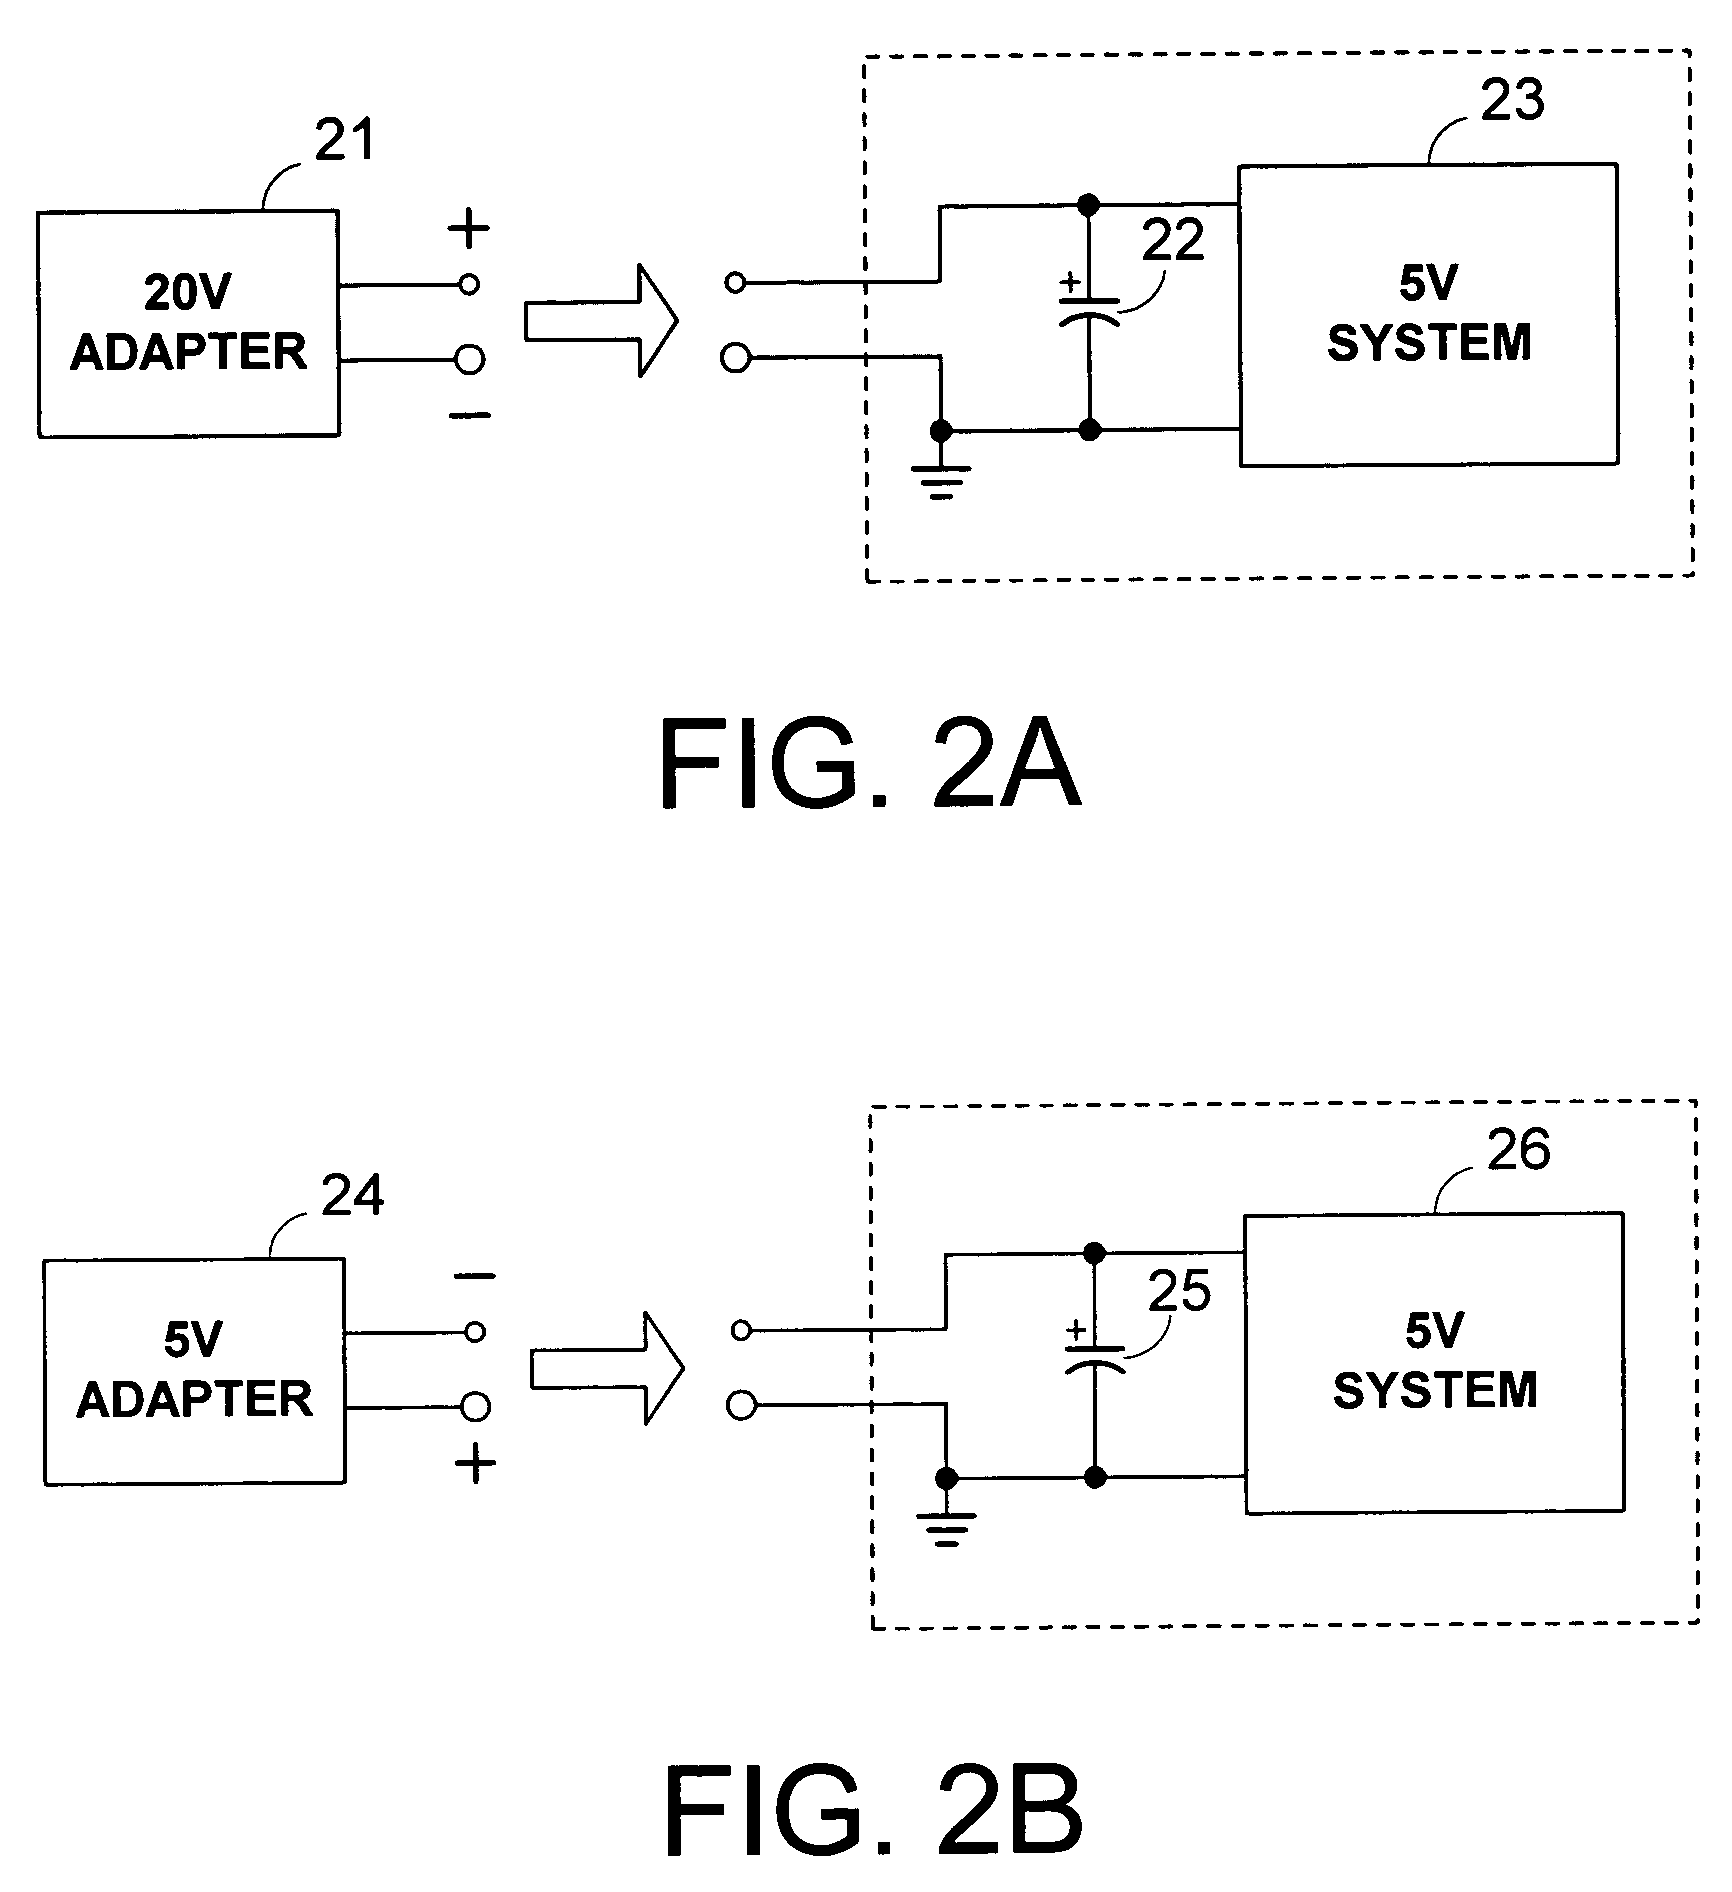 Power adapter interface circuitry for protecting a battery operated system